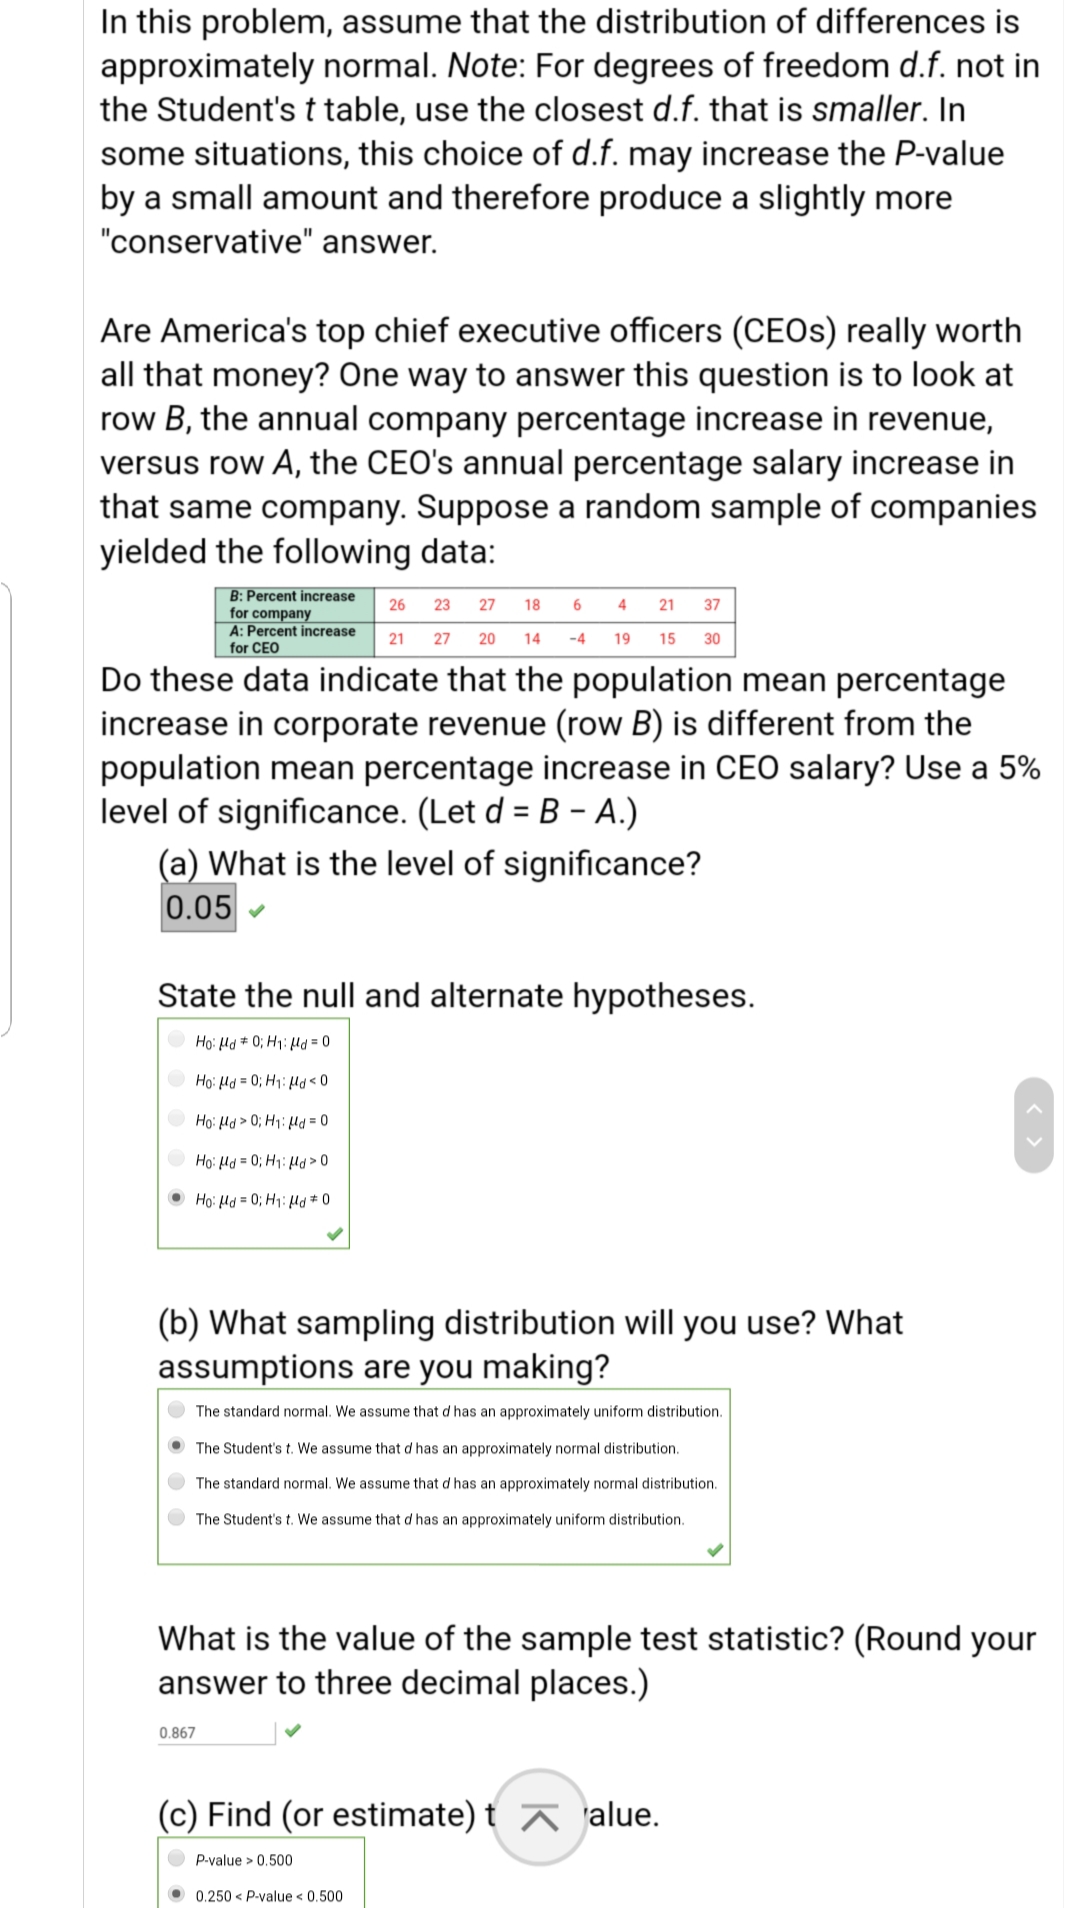 Are America's top chief executive officers (CEOS) really worth
all that money? One way to answer this question is to look at
row B, the annual company percentage increase in revenue,
versus row A, the CEO's annual percentage salary increase in
that same company. Suppose a random sample of companies
yielded the following data:
